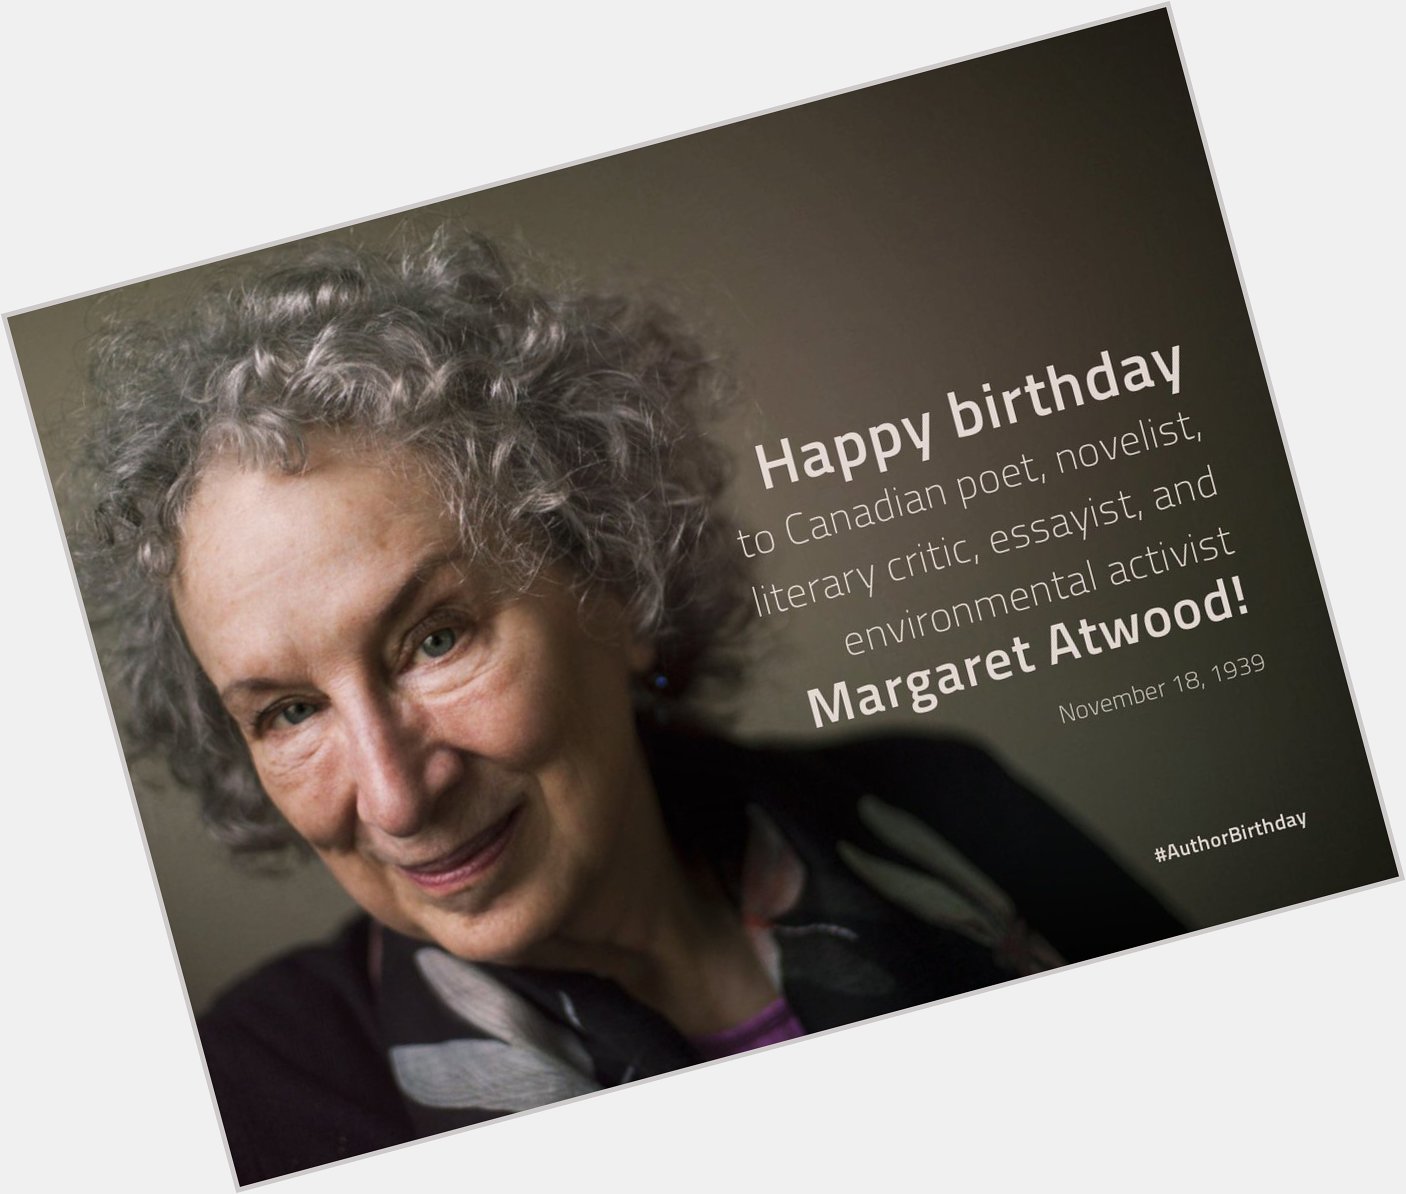 Happy birthday to Margaret Atwood, an award-winning writer known for her novels, poetry, and essays. 